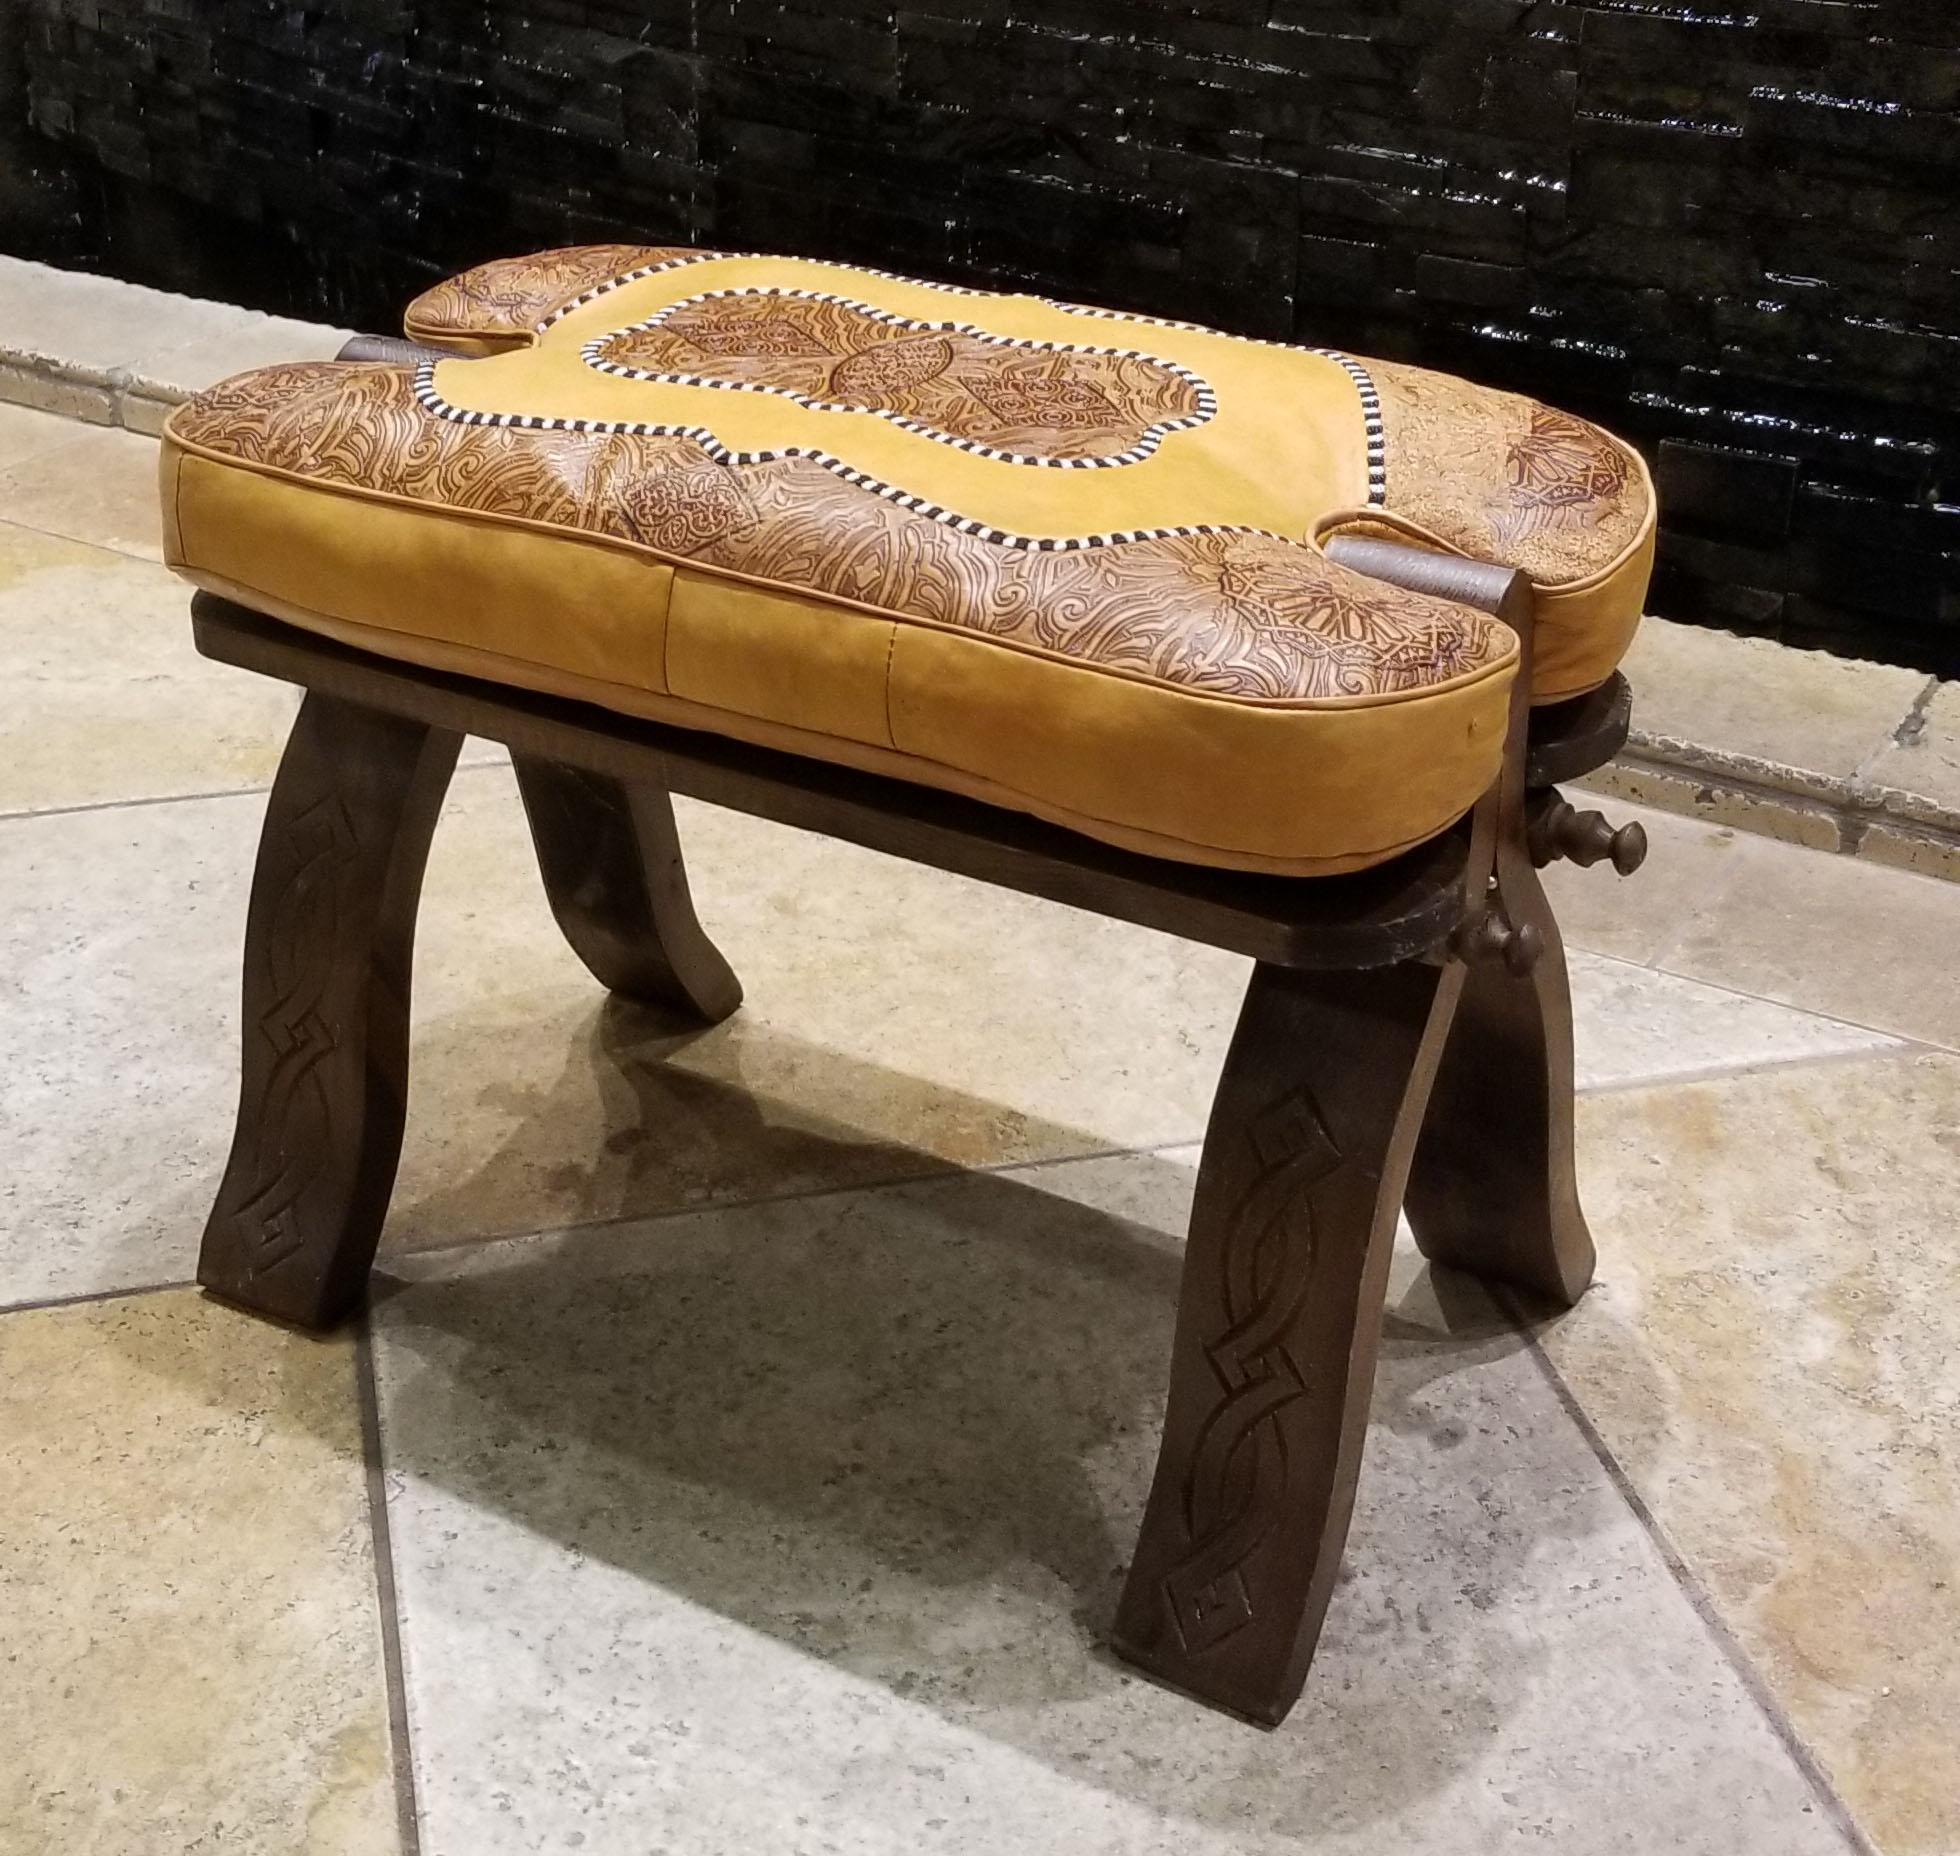 This is a great alternative to poufs and ottomans.
Handmade Moroccan camel saddle with genuine leather cushion and carved cedar wood base, measuring approximately 25 inches long, 13